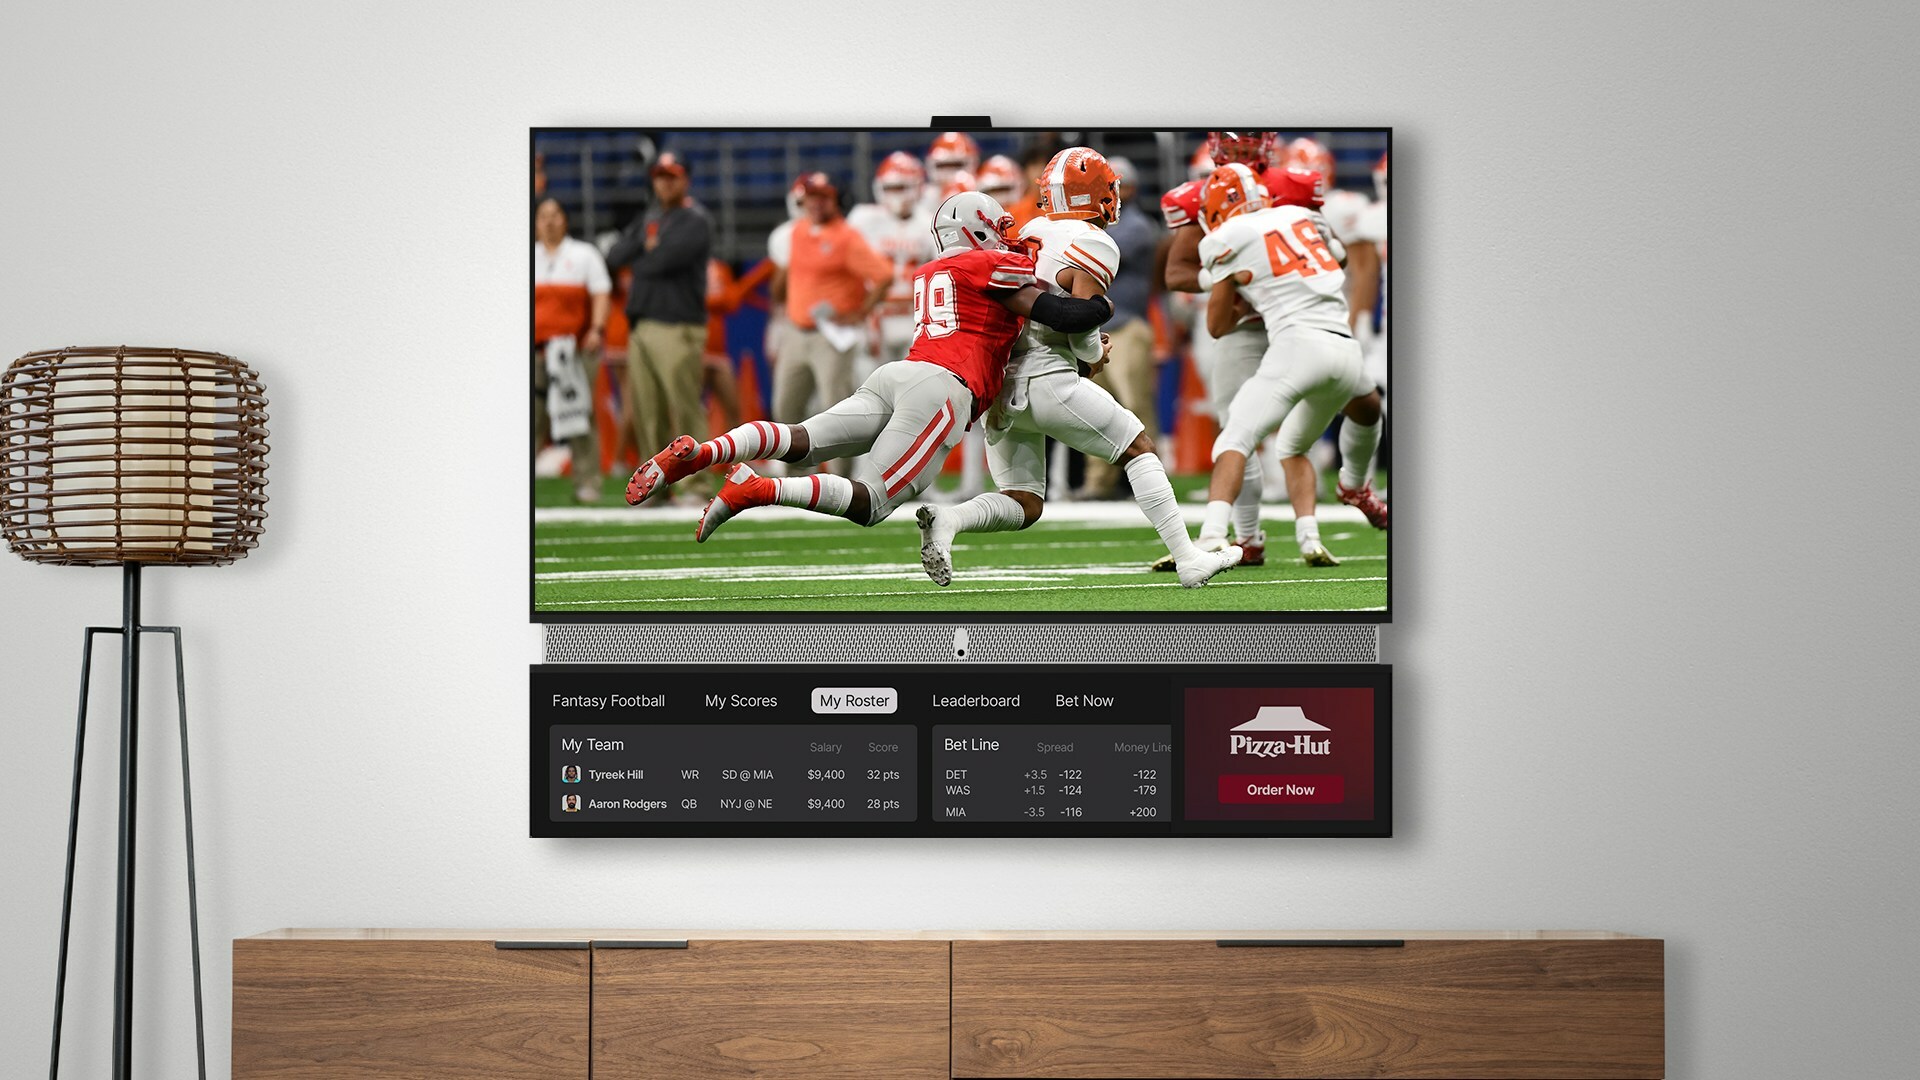 Telly dual screen Smart TV - showing football